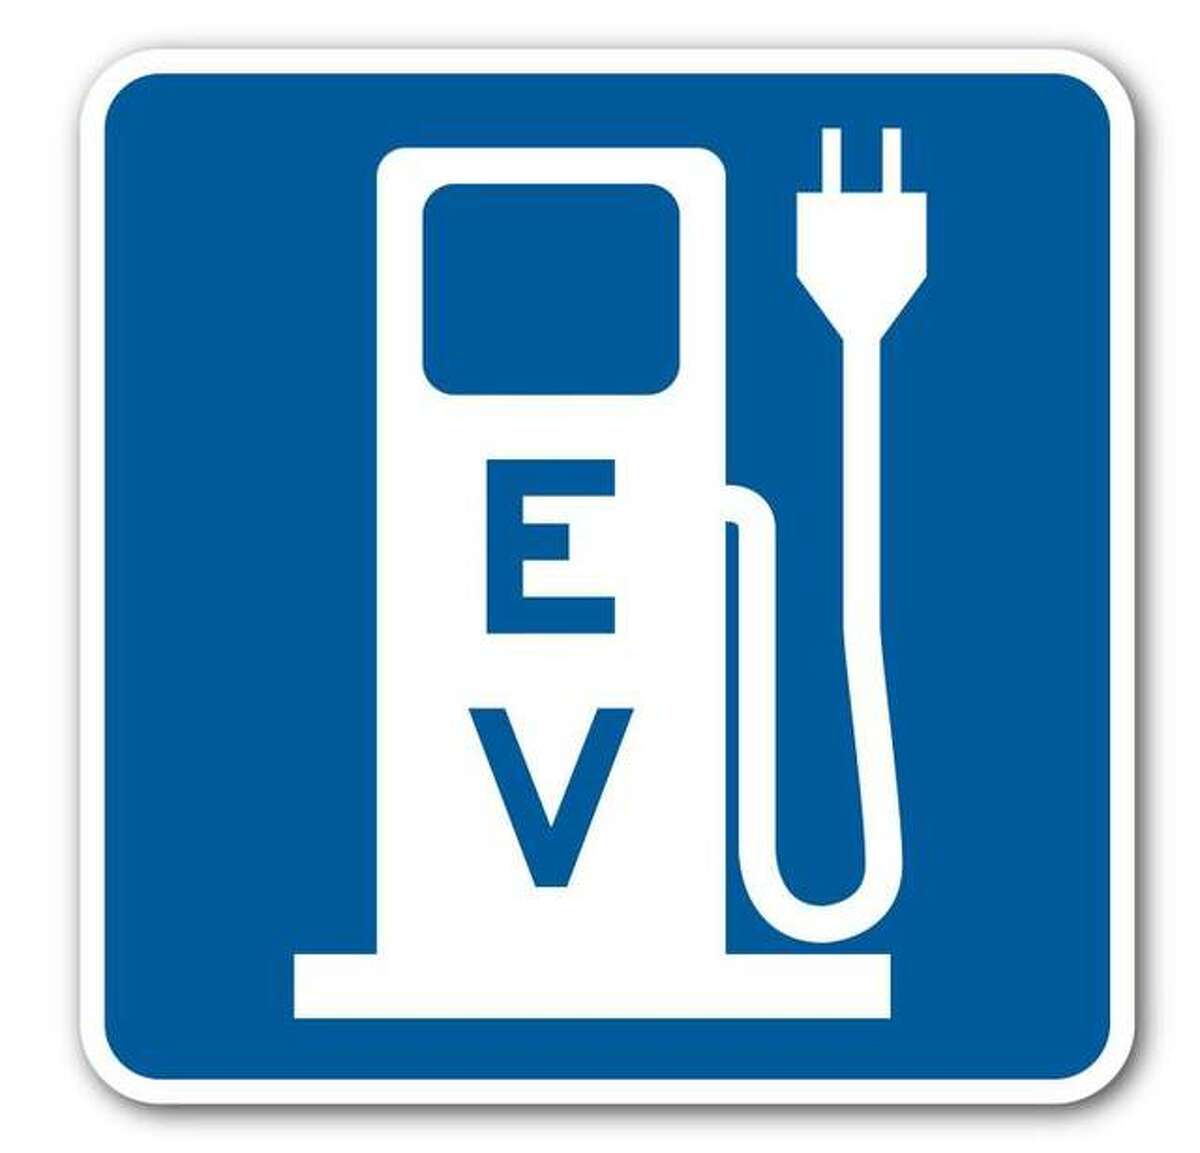 Nearly 20 electric vehicle charging stations are now available in Madison County.